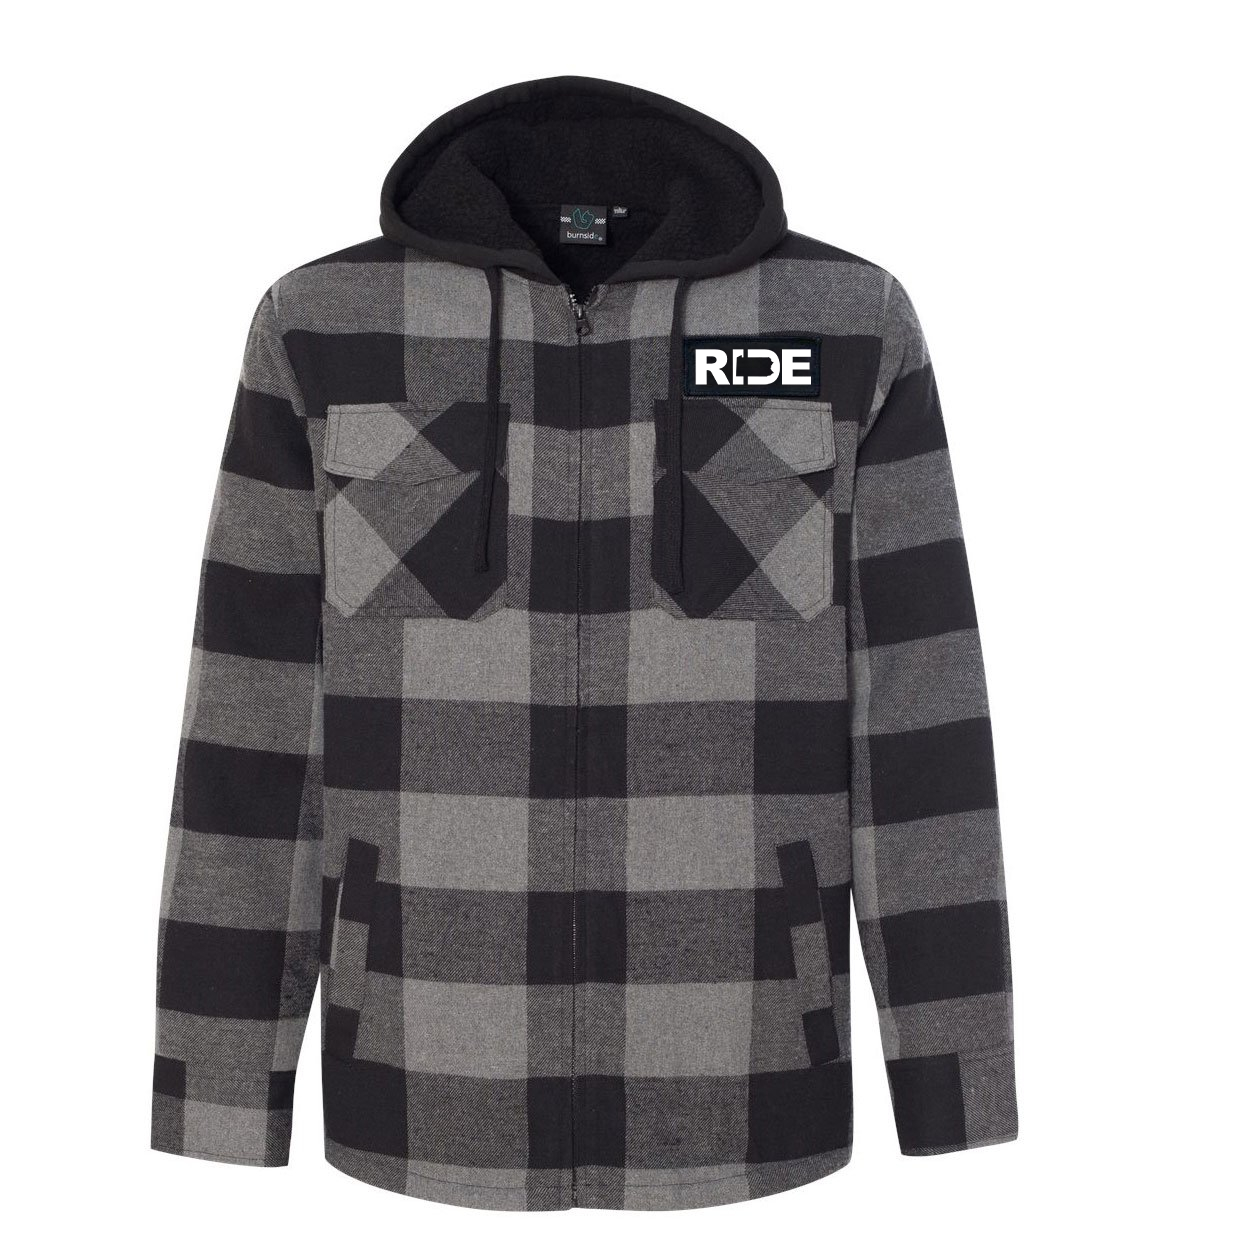 Ride Pennsylvania Classic Unisex Full Zip Woven Patch Hooded Flannel Jacket Black/Gray (White Logo)